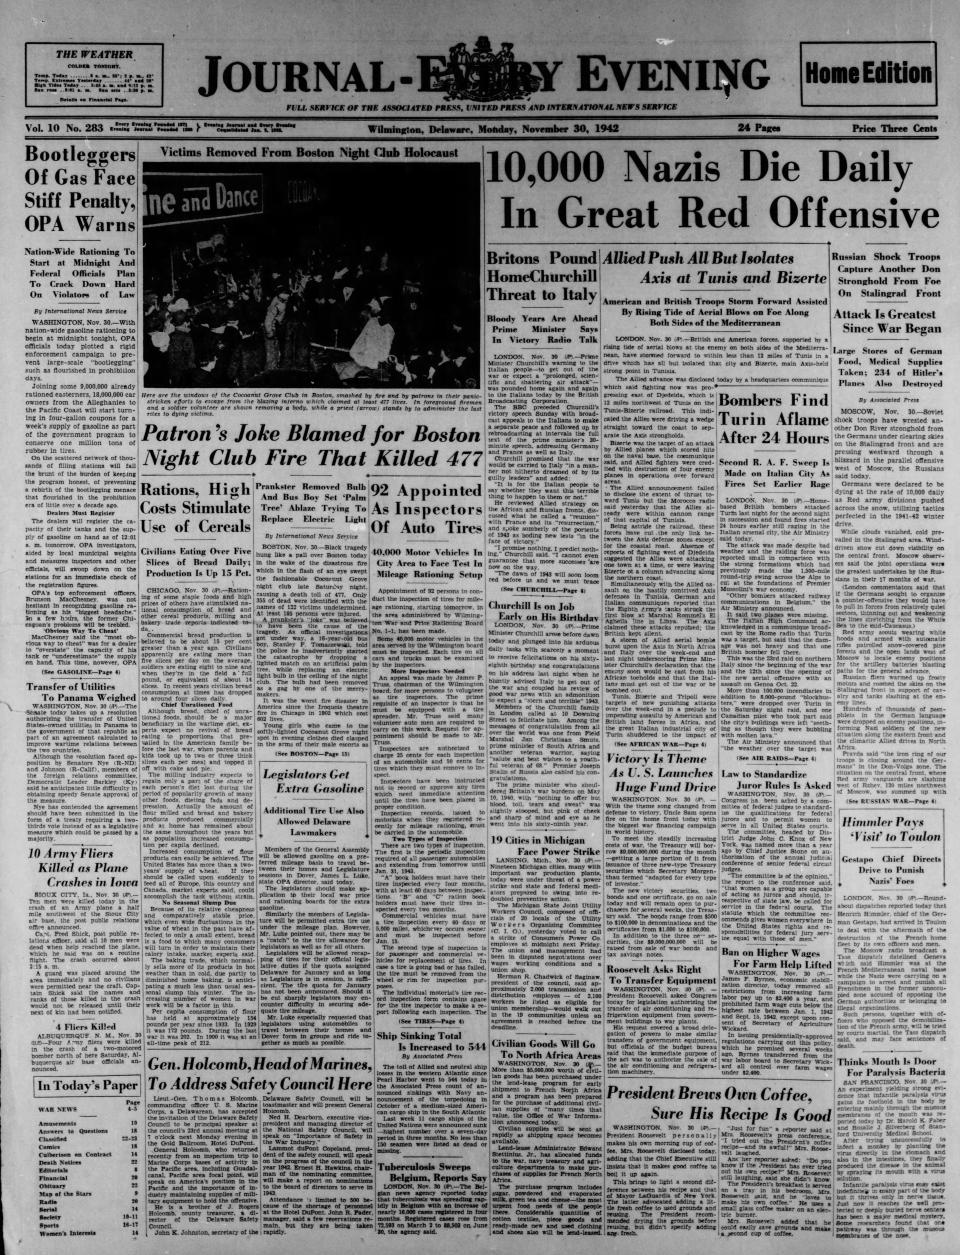 Front page of the Journal - Every Evening from Nov. 30, 1942.